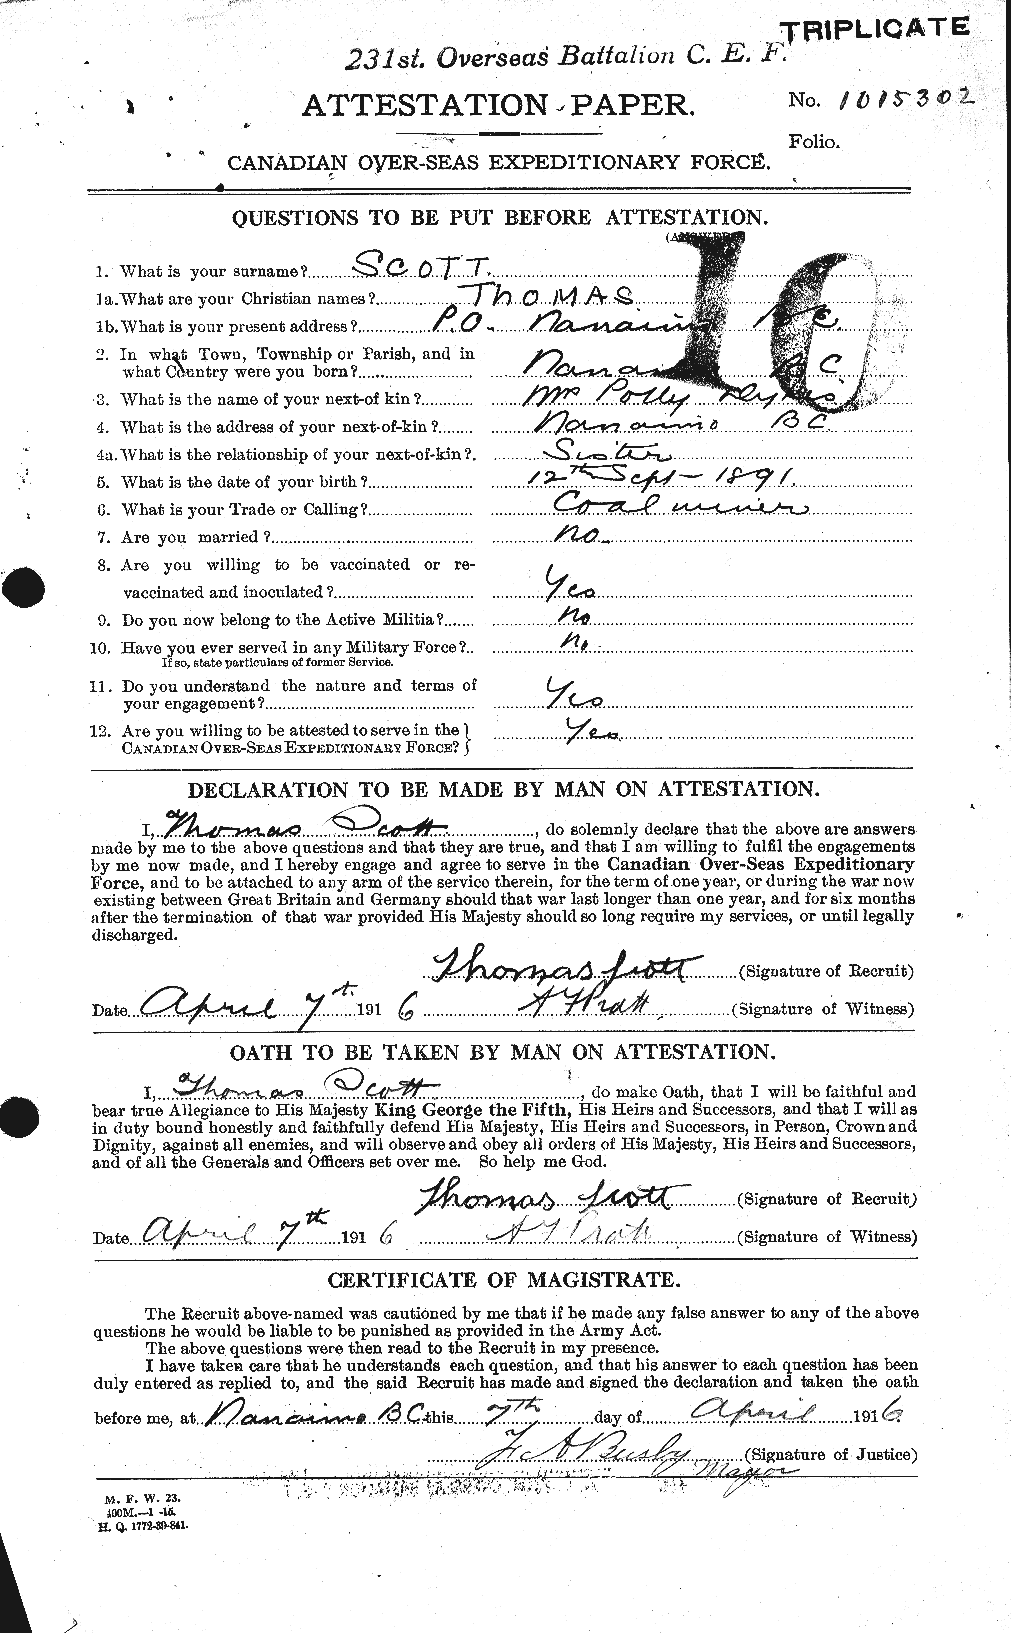 Personnel Records of the First World War - CEF 088533a